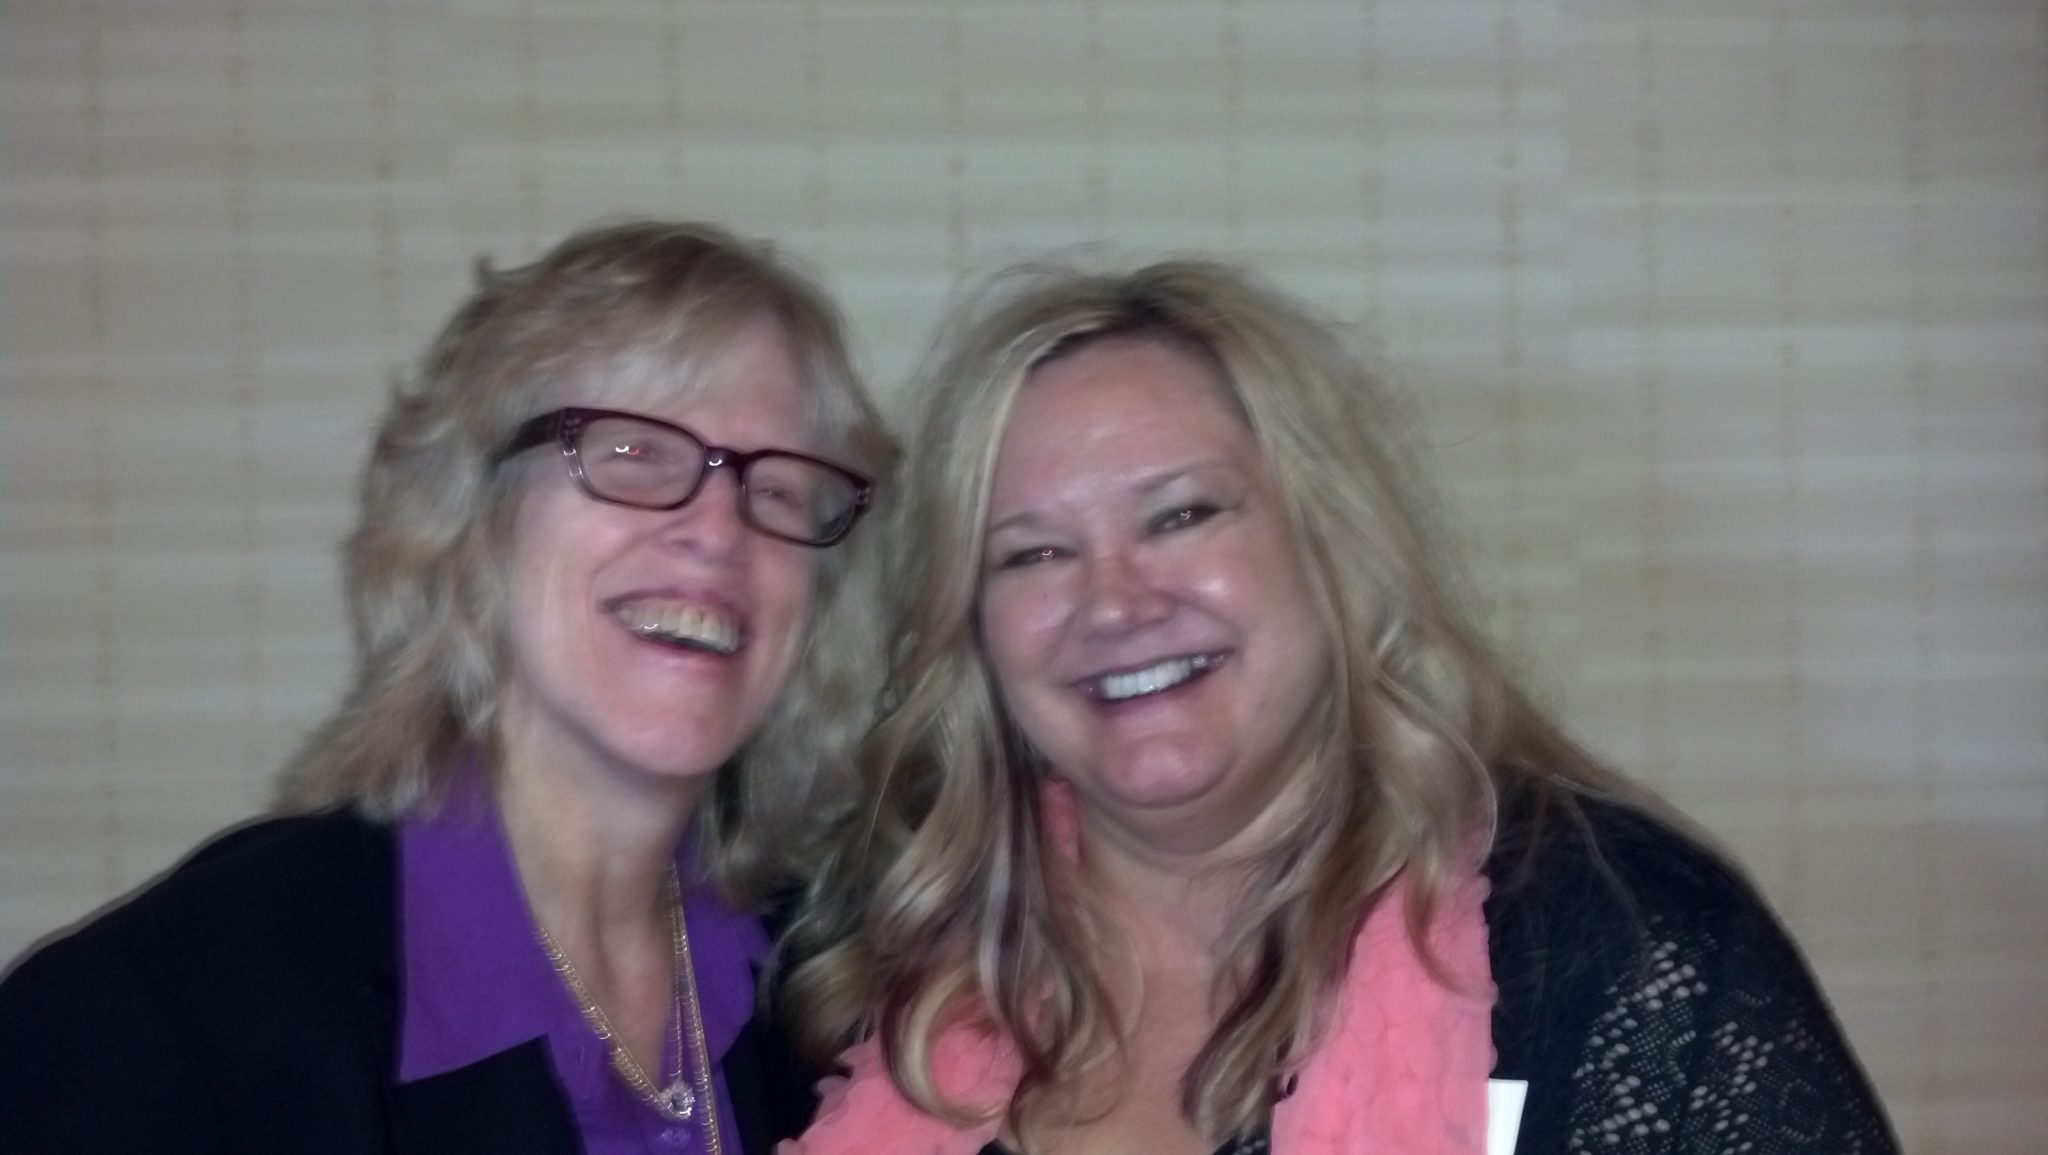 Sheri and Bonnie pic 2 event